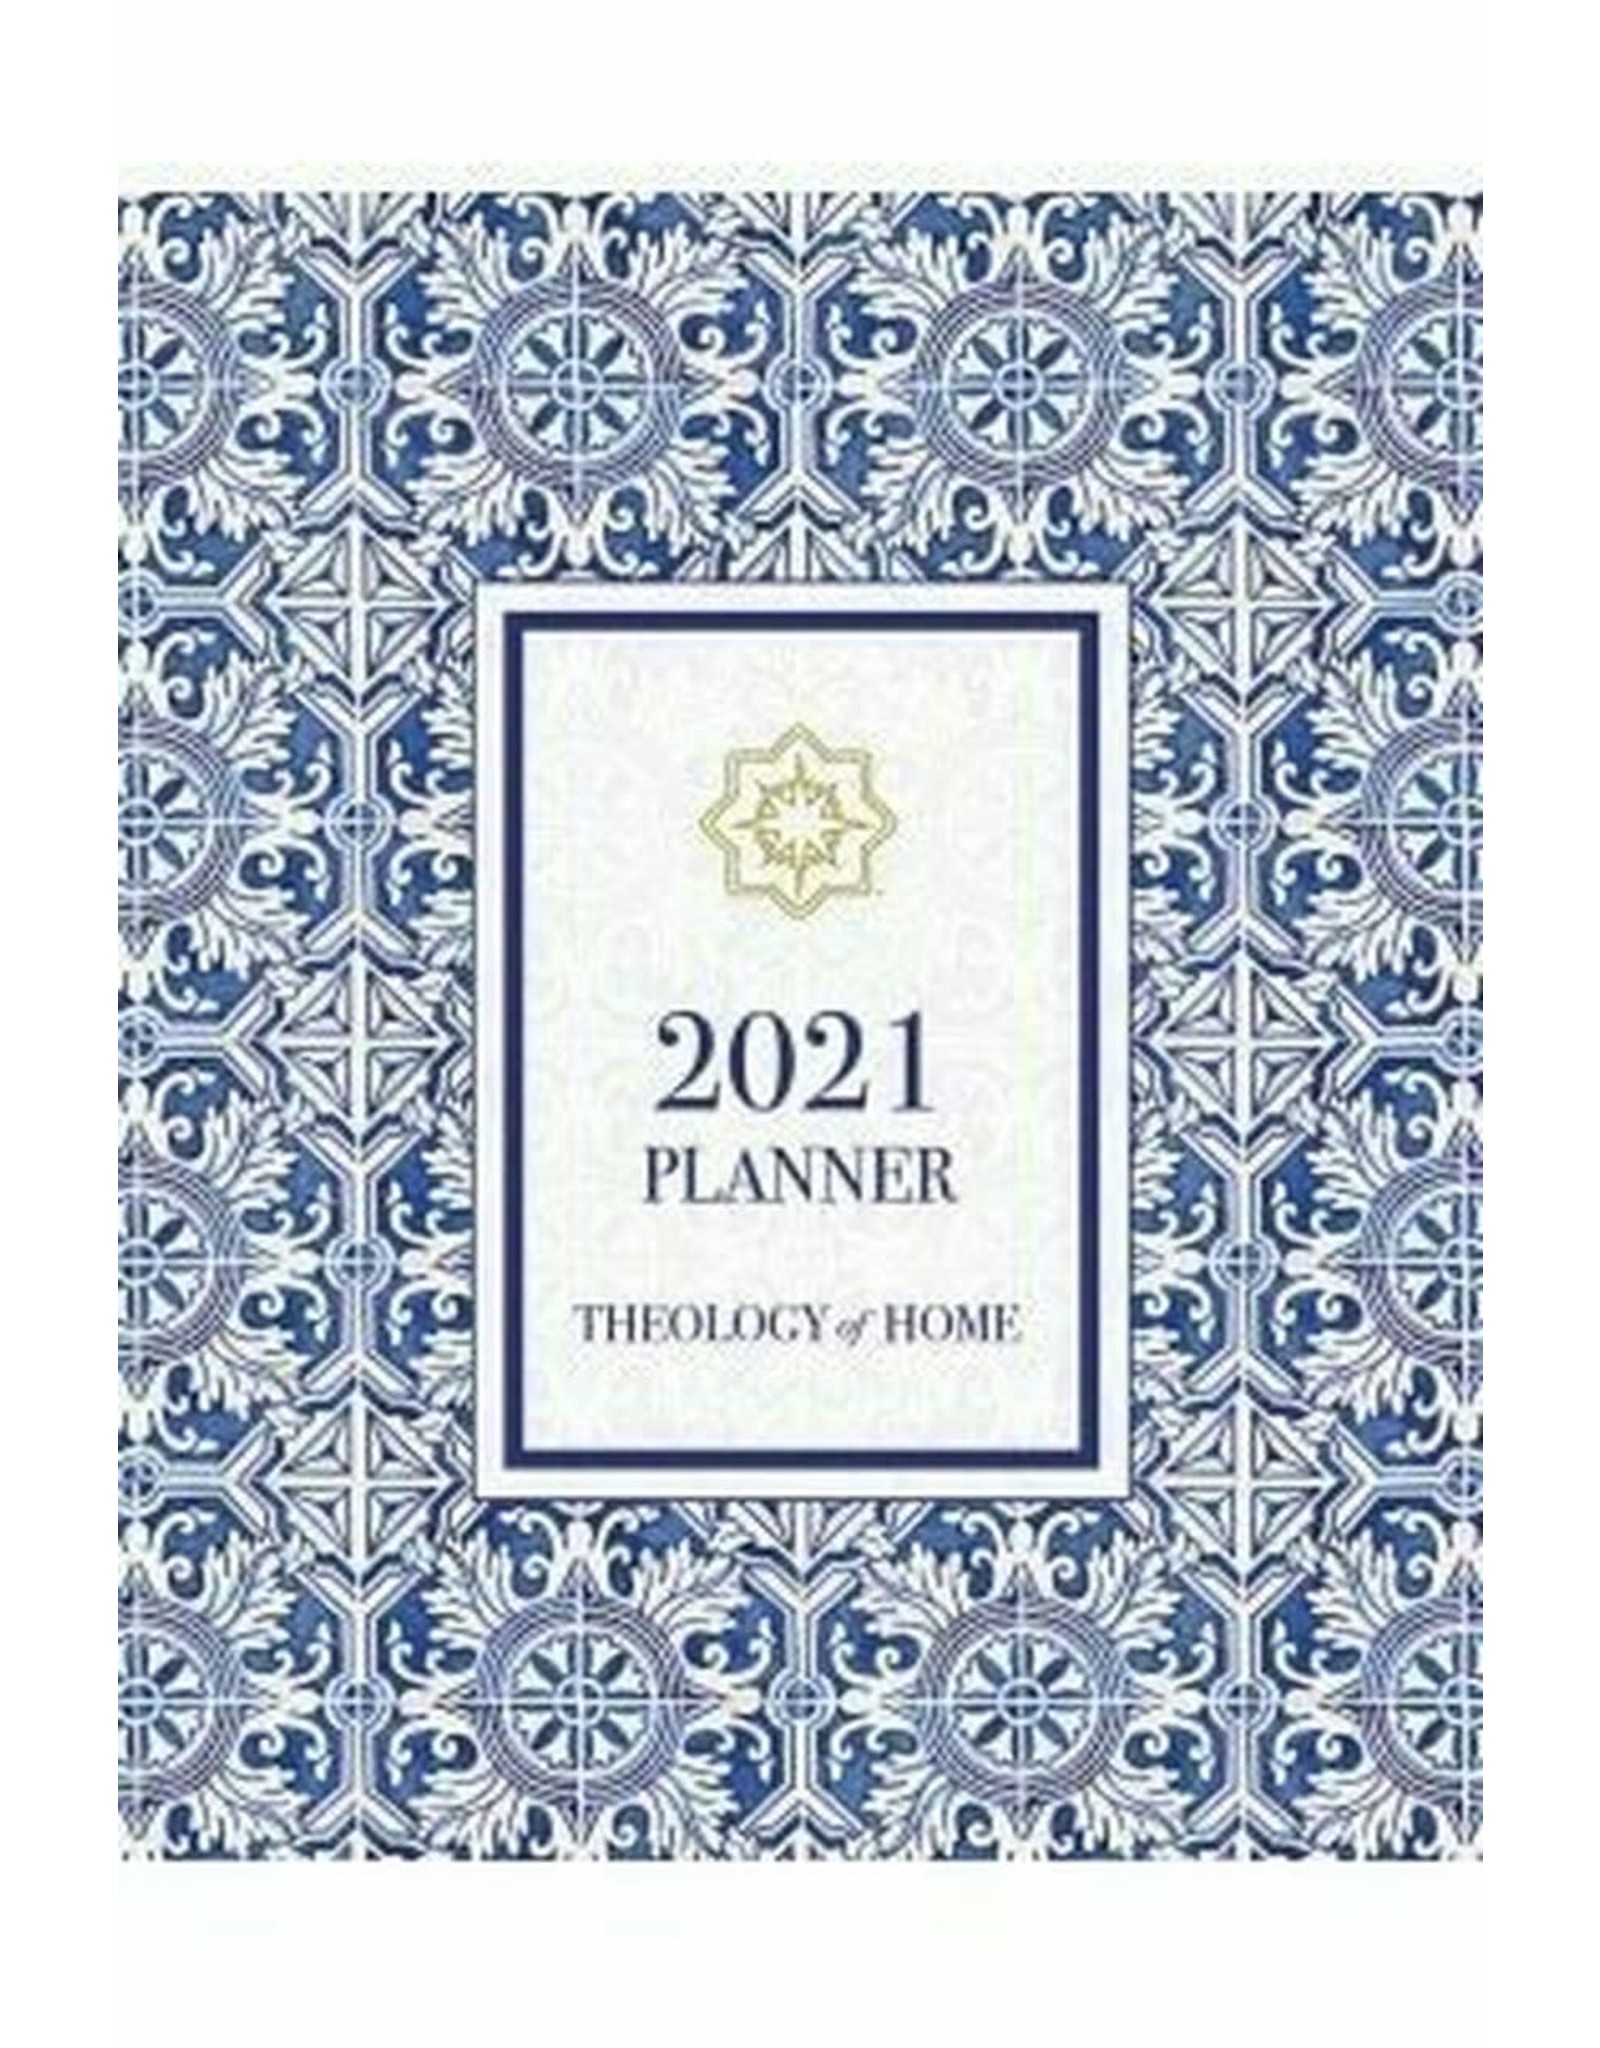 Tan Books 2021 Theology Of Home Planner by Carrie Gress And Noelle Mering (Spiralbound)